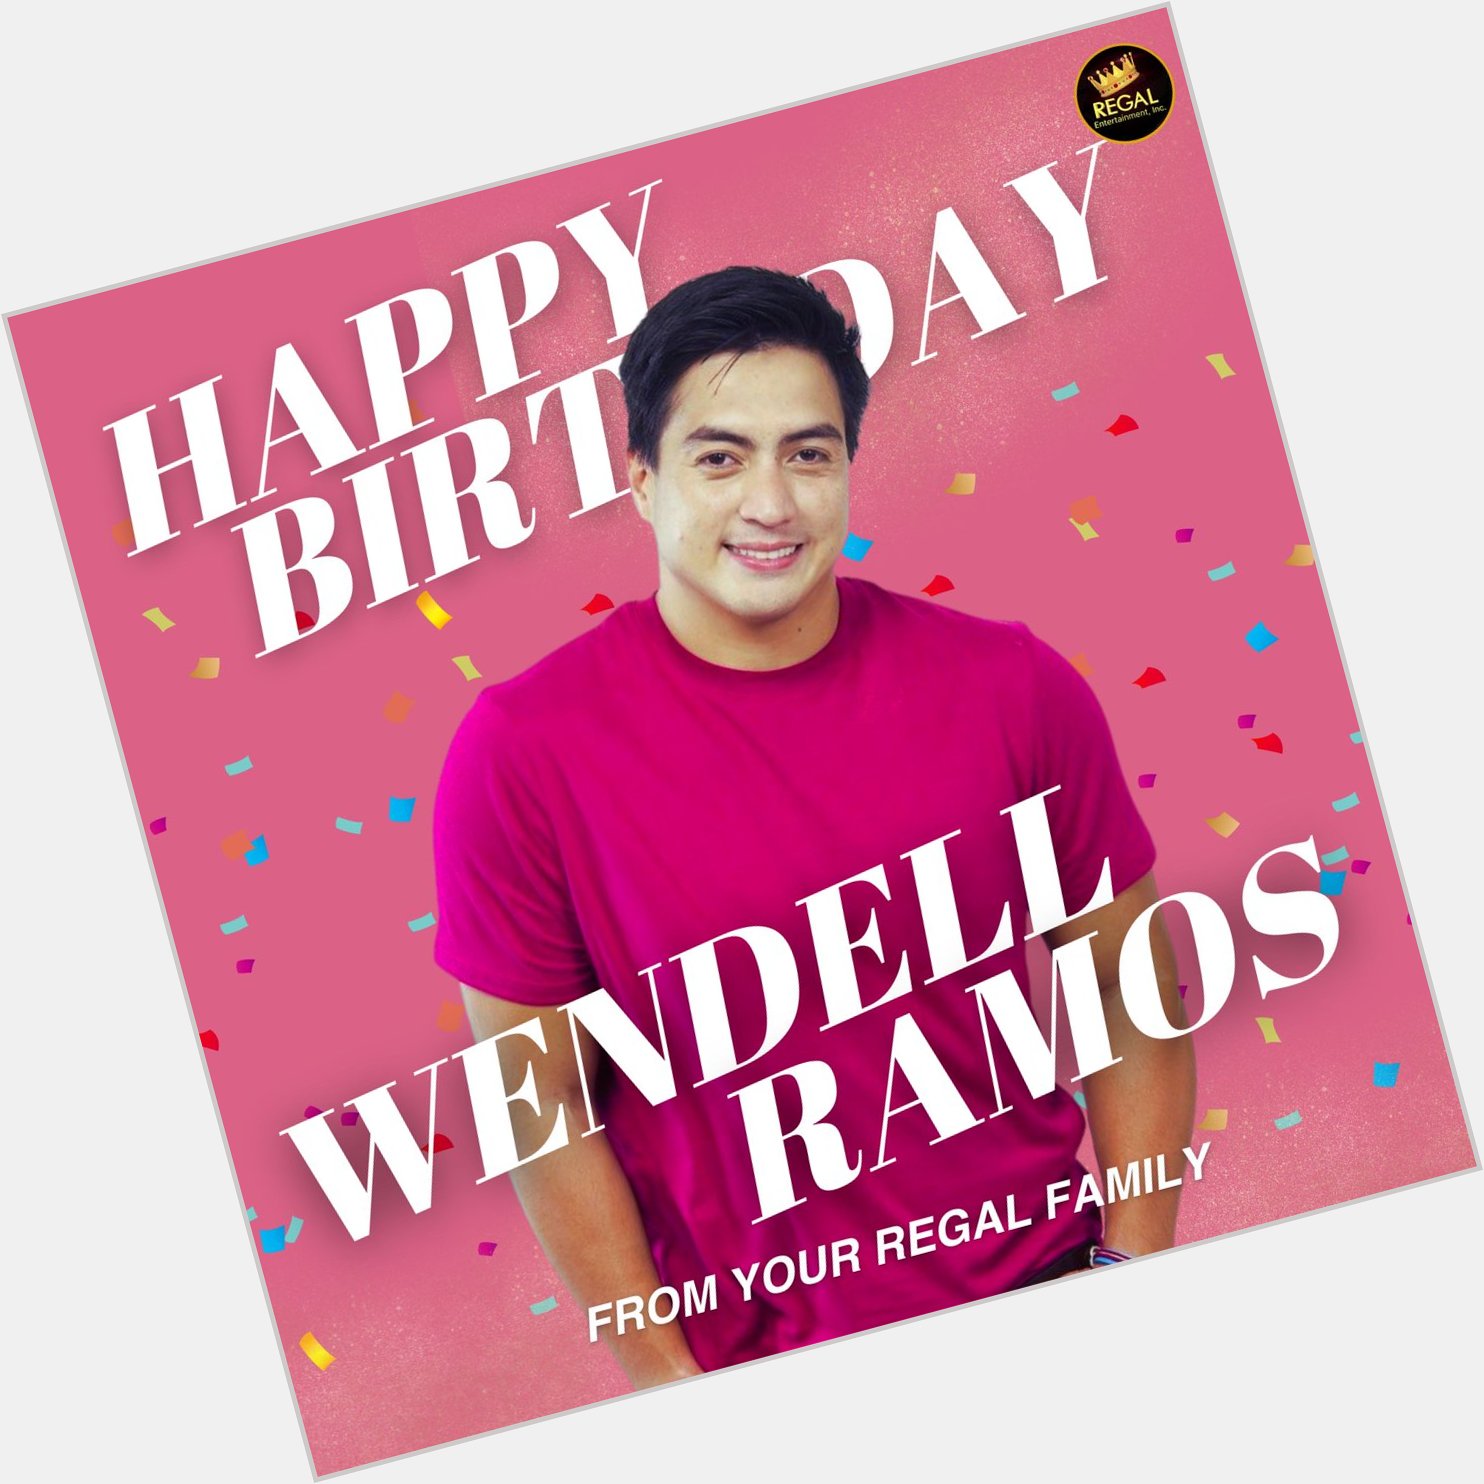 Happy Birthday Wendell Ramos! We wish you all the best in life! From your Regal Family!  